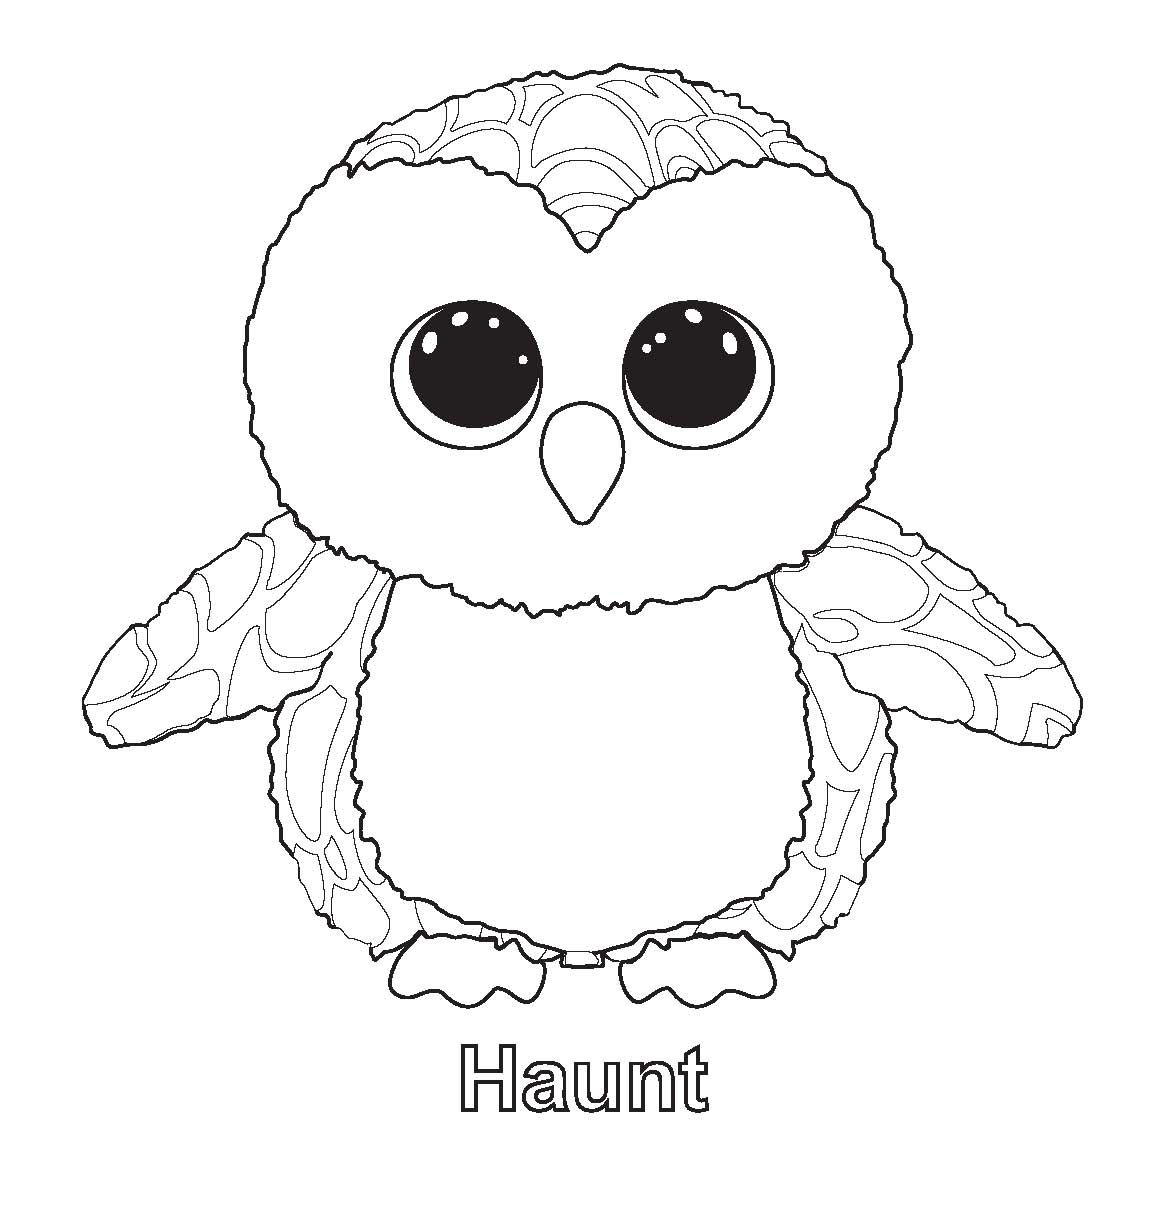 Haunt - Beanie Boo Coloring Pages